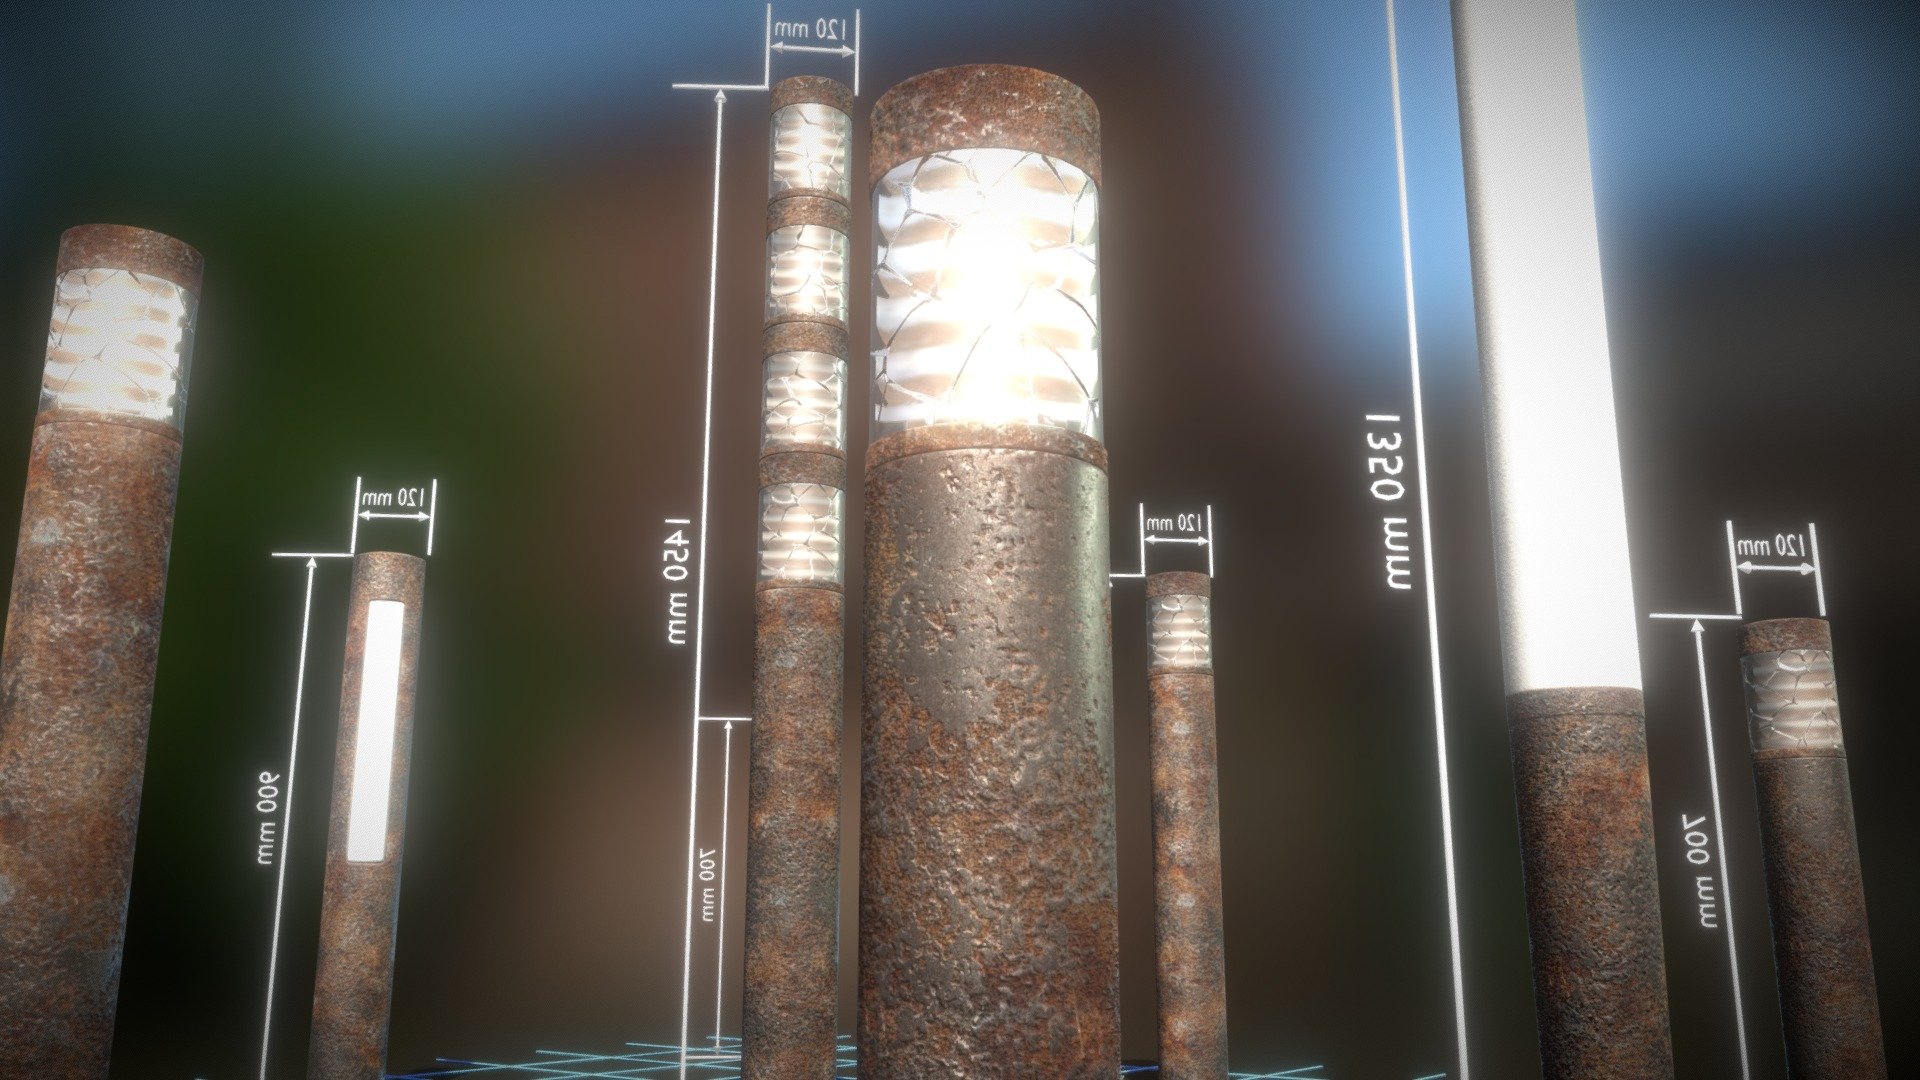 Here is a set of bollard city lights with rusted case.
Parts:




Bollard_Light_Rust_L_2_1350mm 

Polygons = 382






Bollard_Light_Rust_L_1_1100mm 

Polygons = 358






Bollard_Light_Rust_D_1_700mm 

Polygons = 1051






Bollard_Light_Rust_D_2_700mm 

Polygons = 883






Bollard_Light_Rust_D_3_900mm 

Polygons = 883






Bollard_Light_Rust_F_1_700mm 

Polygons = 262






Bollard_Light_Rust_N_1_1450mm 

Polygons = 3226






Bollard_Light_Rust_O_1_900mm 

Polygons = 187






Object rotation and location is 0, scale is 1.000 x 1.000 x 1.000

The center of the object is where it should be, so you can easily place the object on the floor

PBR Textures (4K) : Base Color, Normal, Metalness, Roughness



Last update:
17:31:46  14.04.22






3d modeled and textured by 3DHaupt in Blender-3.0.


 - Bollard Light Type D F L N O Rusted Version - Buy Royalty Free 3D model by VIS-All-3D (@VIS-All) 3d model